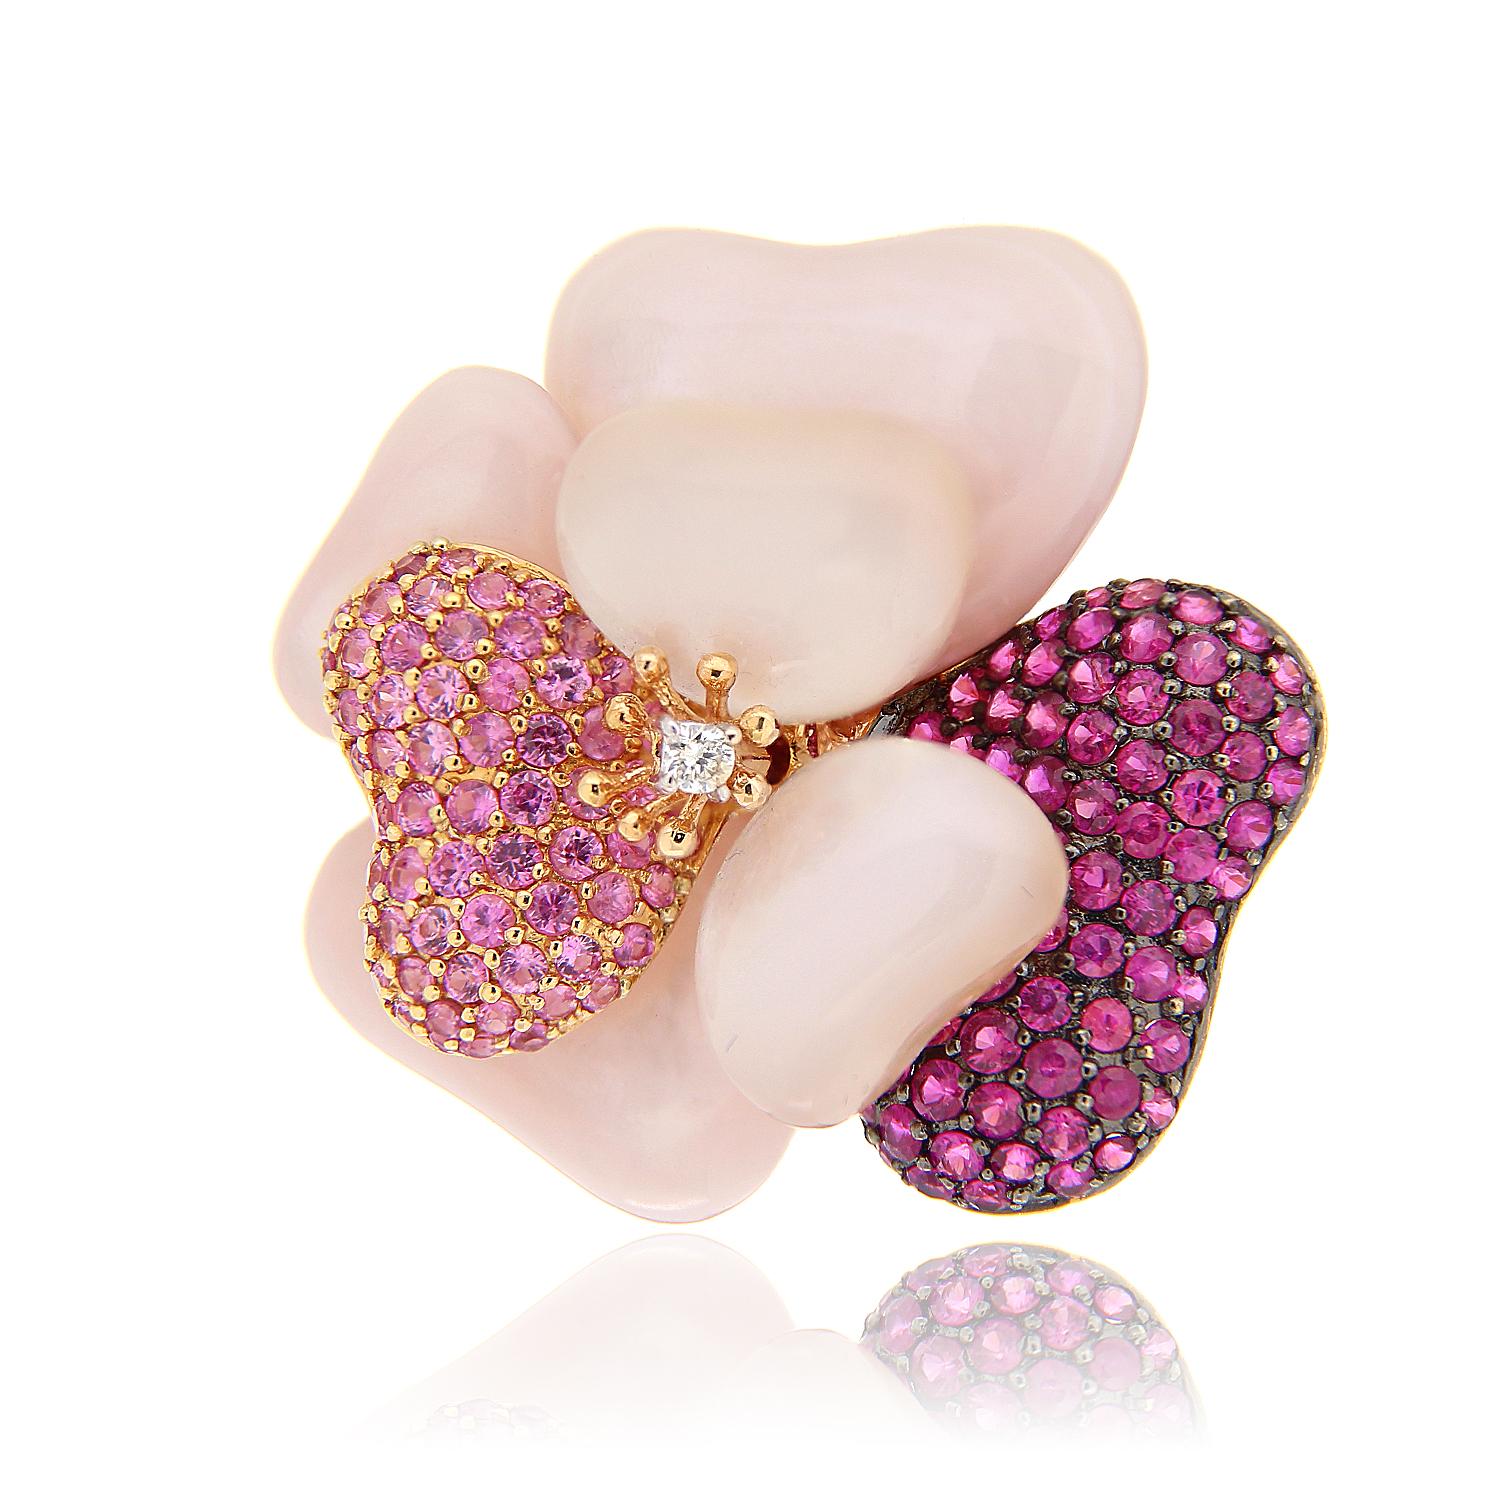 Brilliant Cut 18kt Rose Gold Flower Ring Mother of Pearl Pink Sapphires 0.92 Ct Rubies 1.53 Ct For Sale